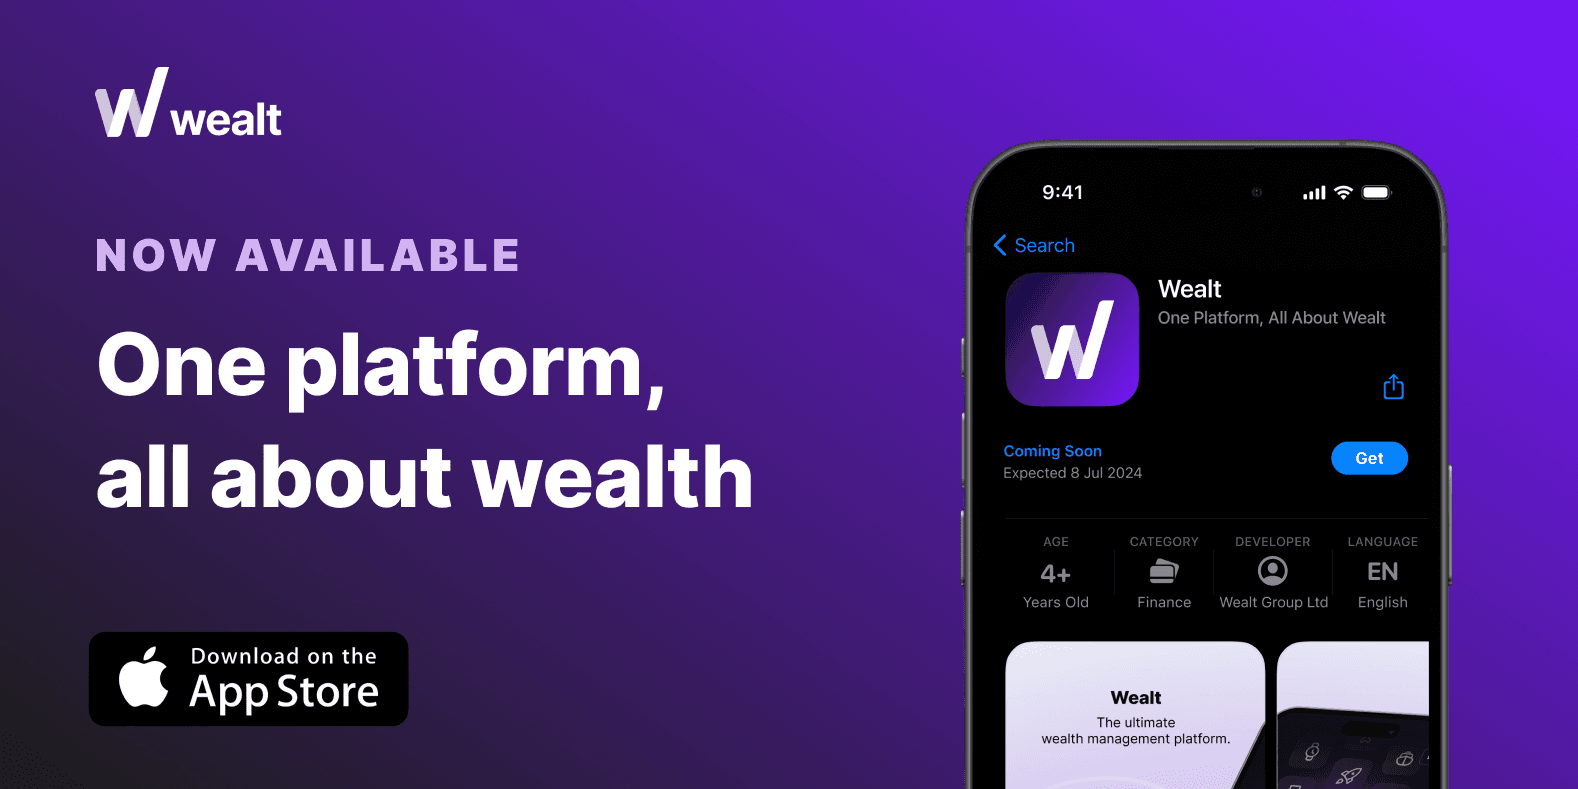 Wealt CEO announces app launch on the App Store, highlighting vision, journey, and gratitude. Invites users to join in transforming wealth management.